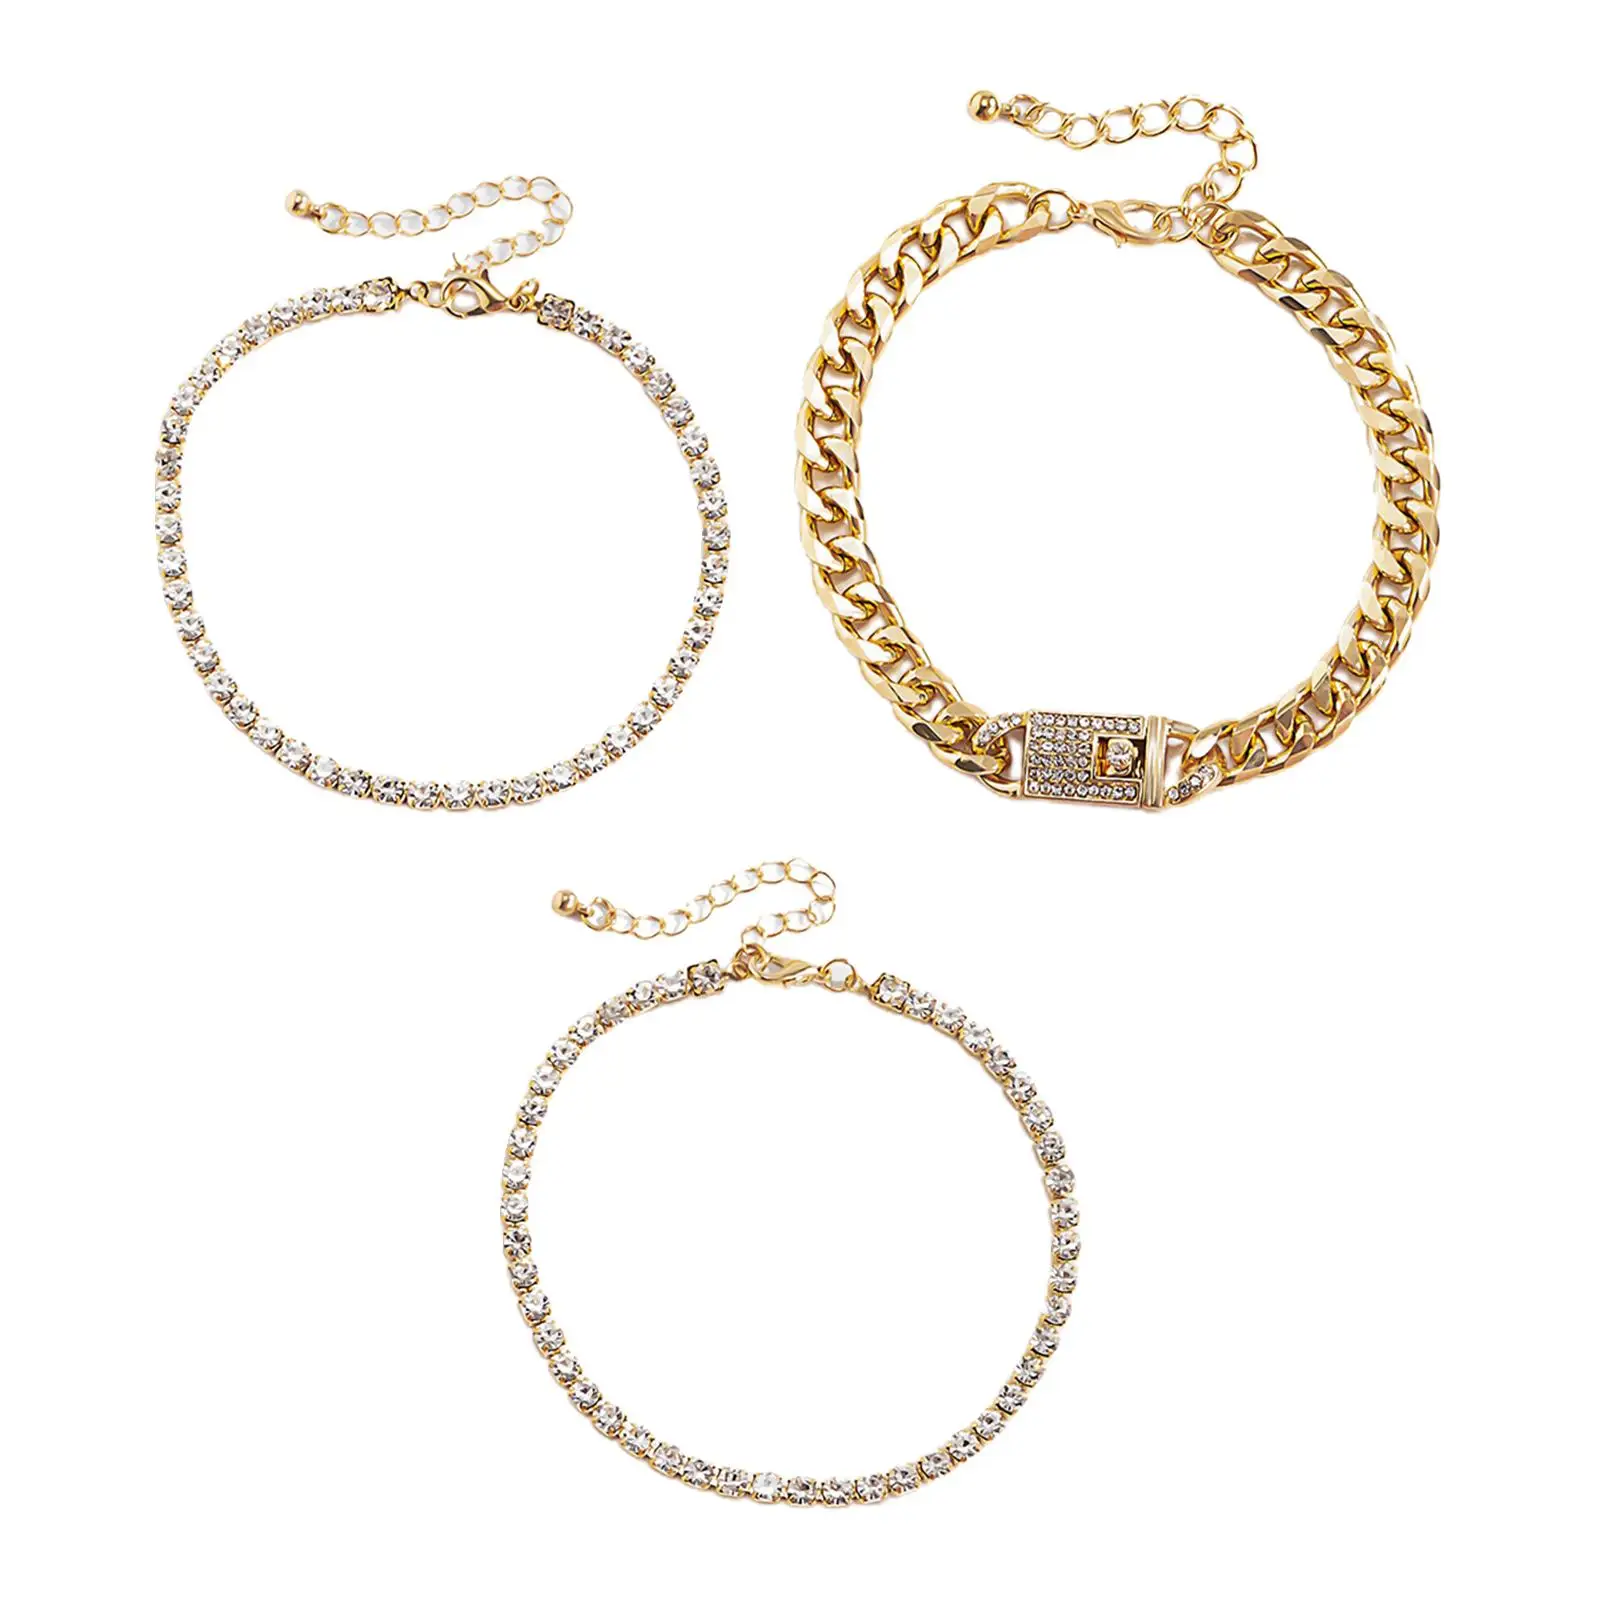 3 Pieces Ankle Bracelets Chain Jewelry Fashion Simple Ankle  Gift